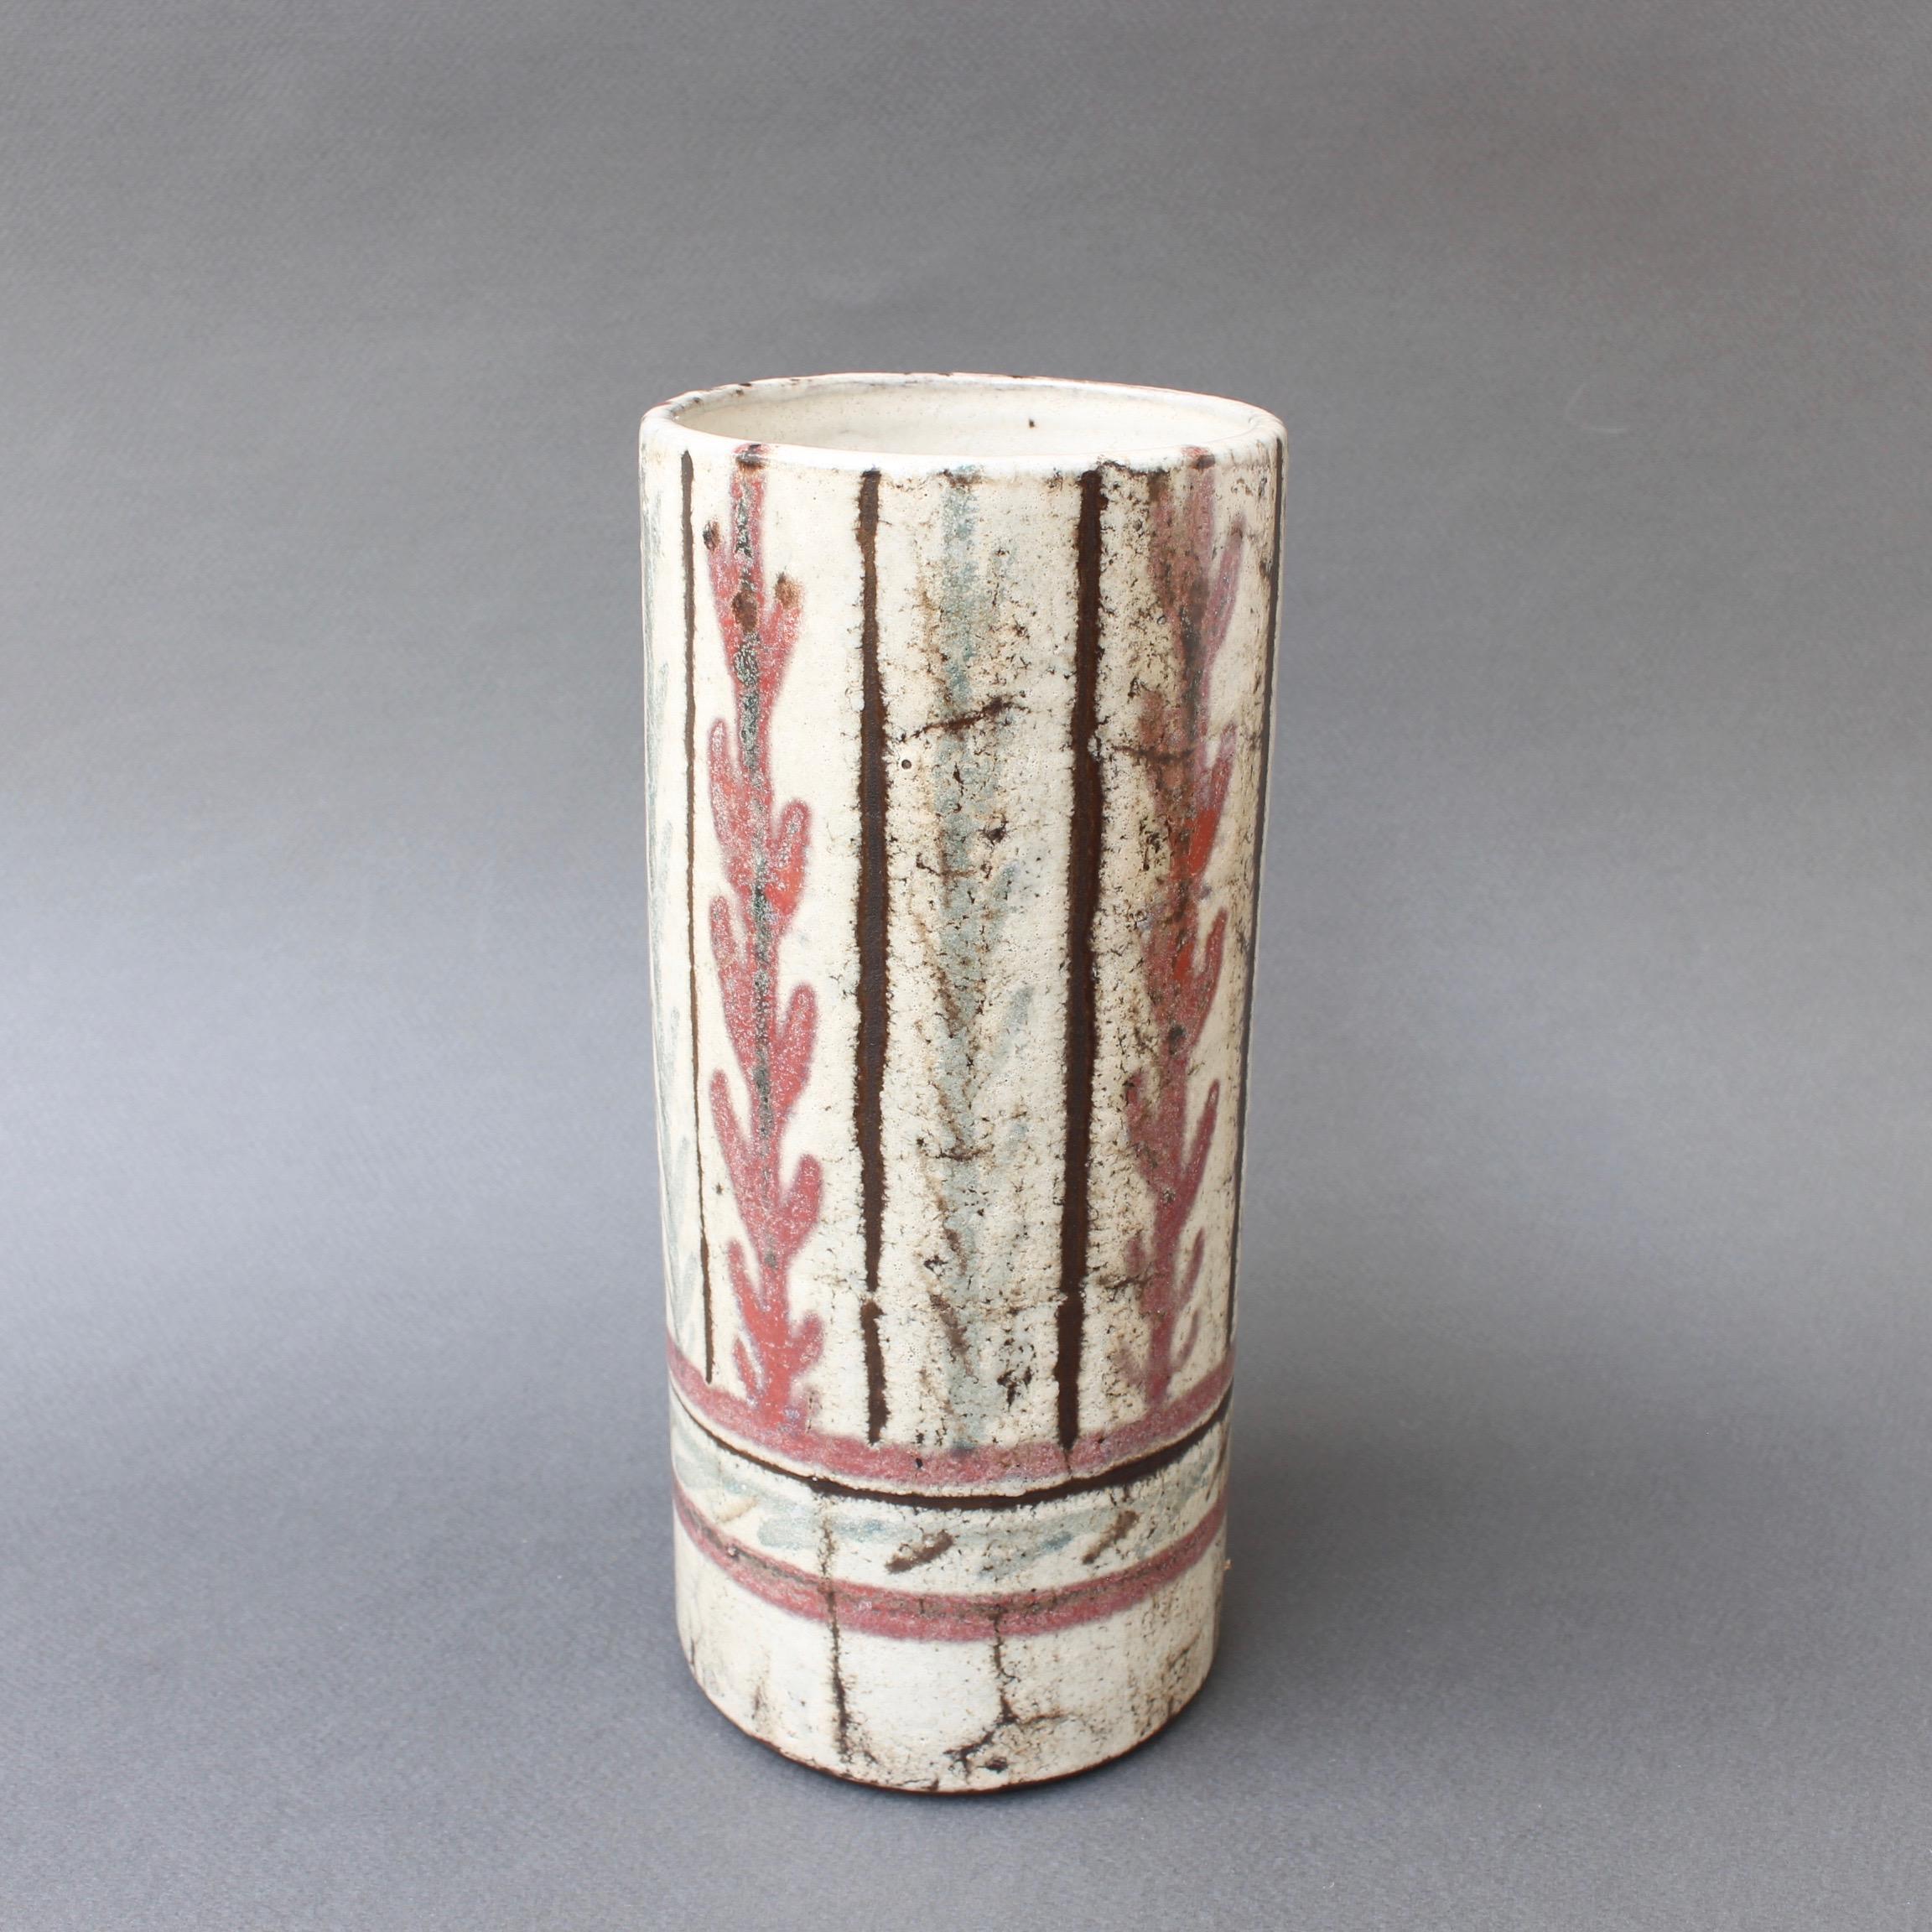 French ceramic vase by Gustave Reynaud, Le Mûrier (circa 1950s). This delightful flower vase is a work of art in the trademark style of Gustave Reynaud. On the rustic exterior you will find charming foliage with baby blue and mulberry coloured